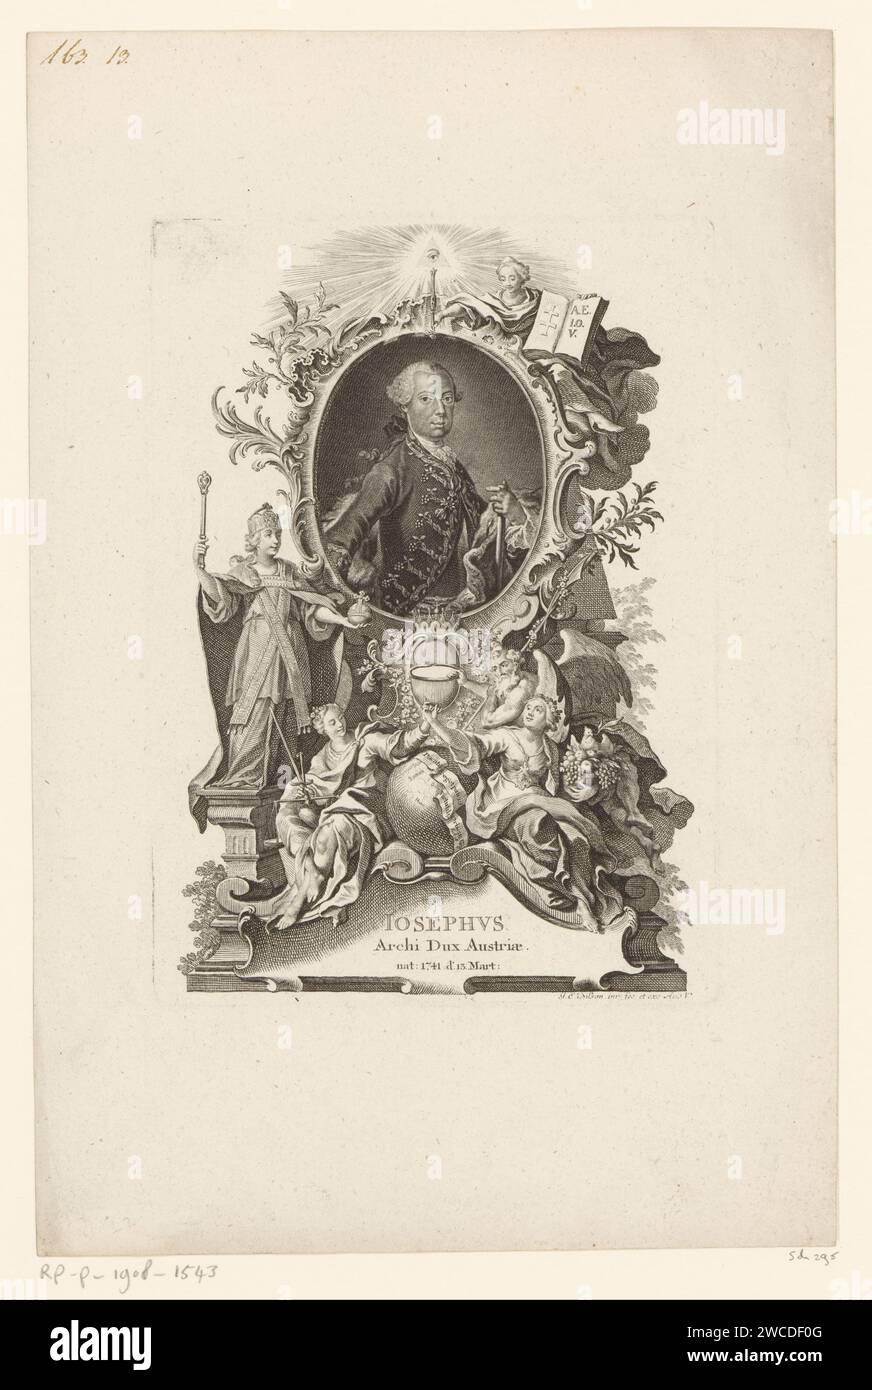 Portrait of Joseph II, Roman -German Keizer, Johann Esaias Nilson, 1746 - 1788 print  Augsburg paper engraving / etching historical persons. insignia of the pope, e.g. tiara. Justitia (justice) as Roman personification. Father Time, man with wings and scythe. Peace and Justice kissing (cf. Ps. 85:10). armour. baton of general. knighthood order of the Golden Fleece - insignia of a knighthood order, e.g.: badge, chain (with NAME of order). globe. serpent Ouroboros Stock Photo